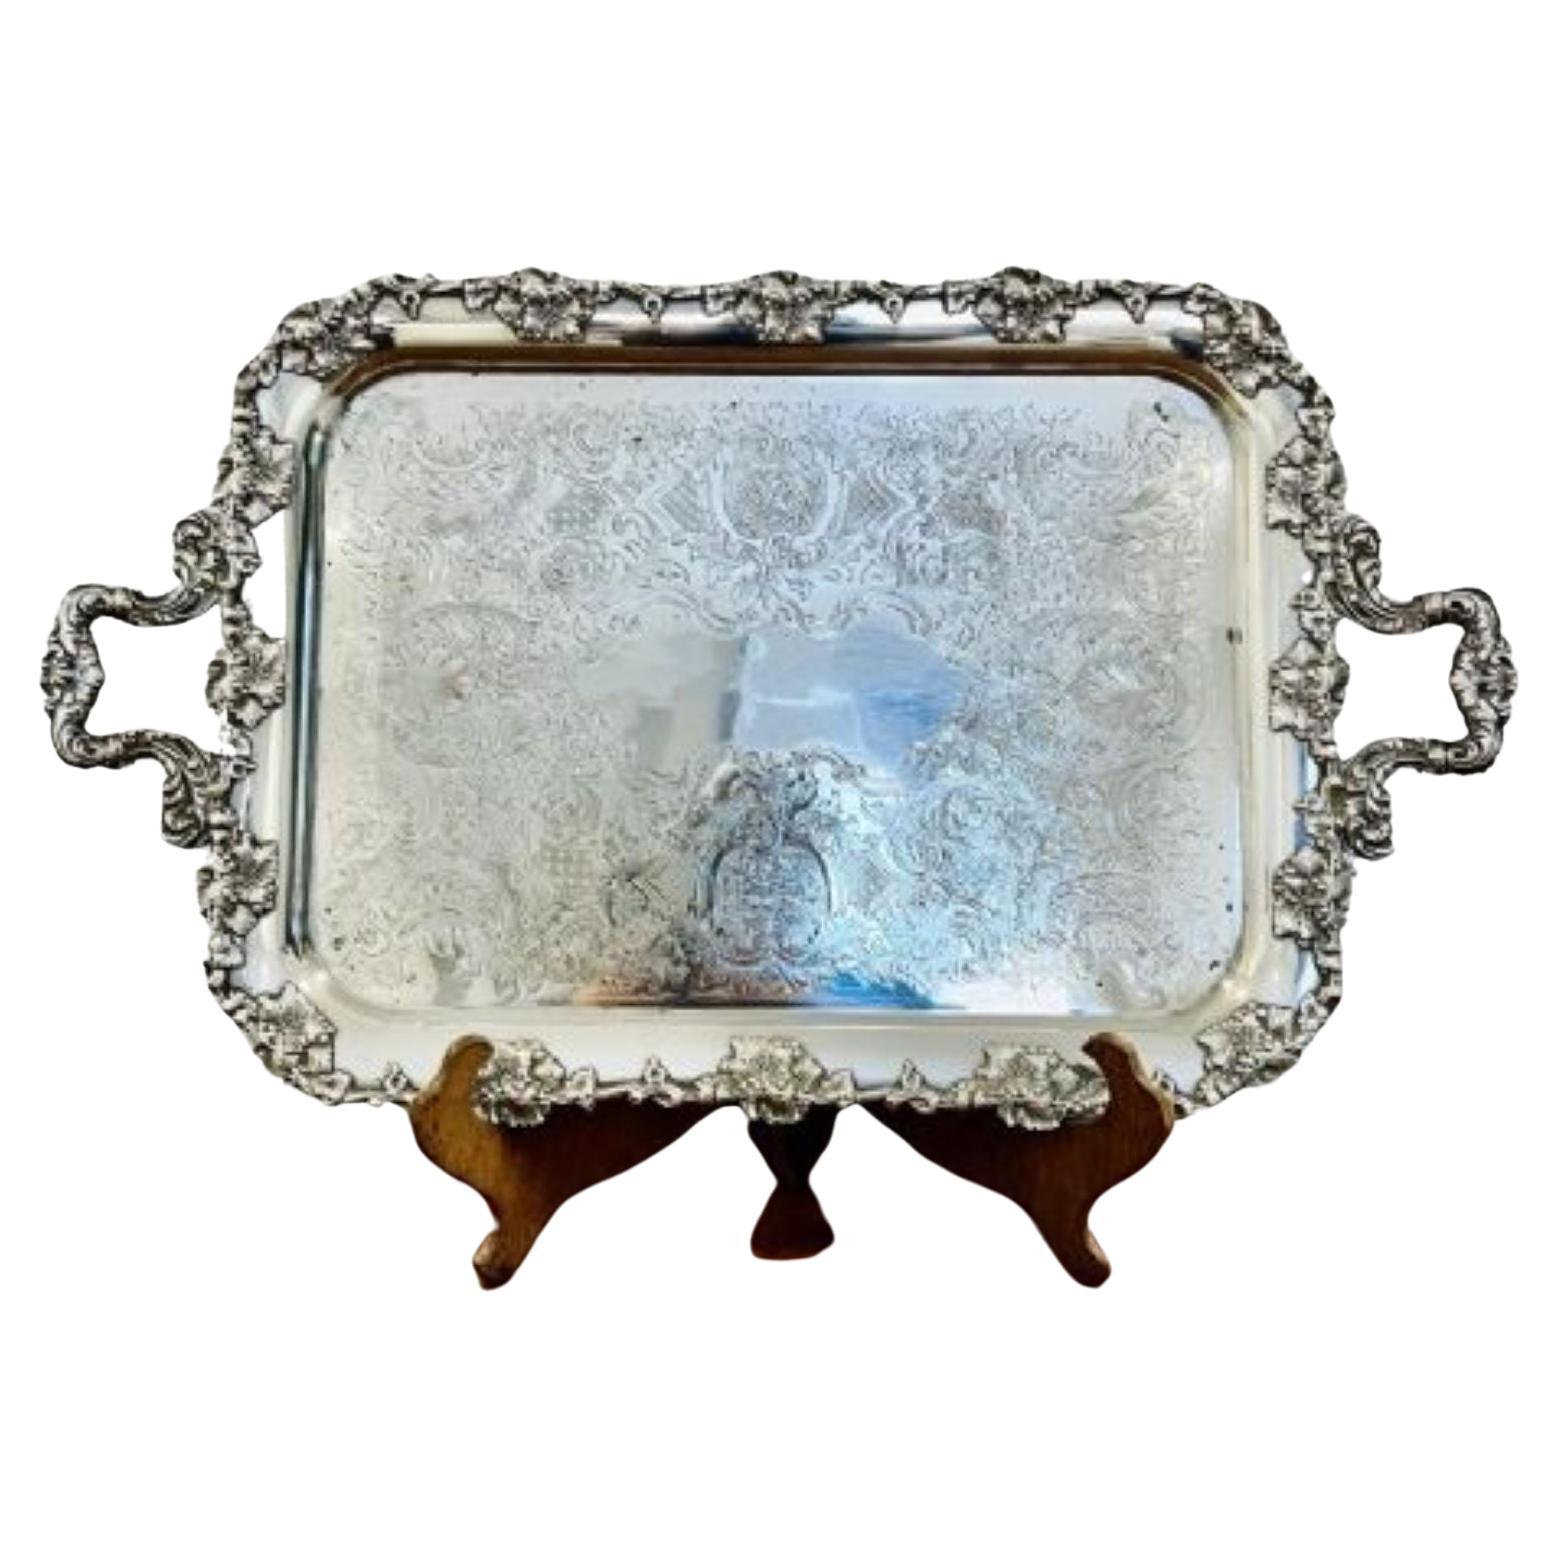 Quality antique Victorian silver plated ornate serving tray For Sale